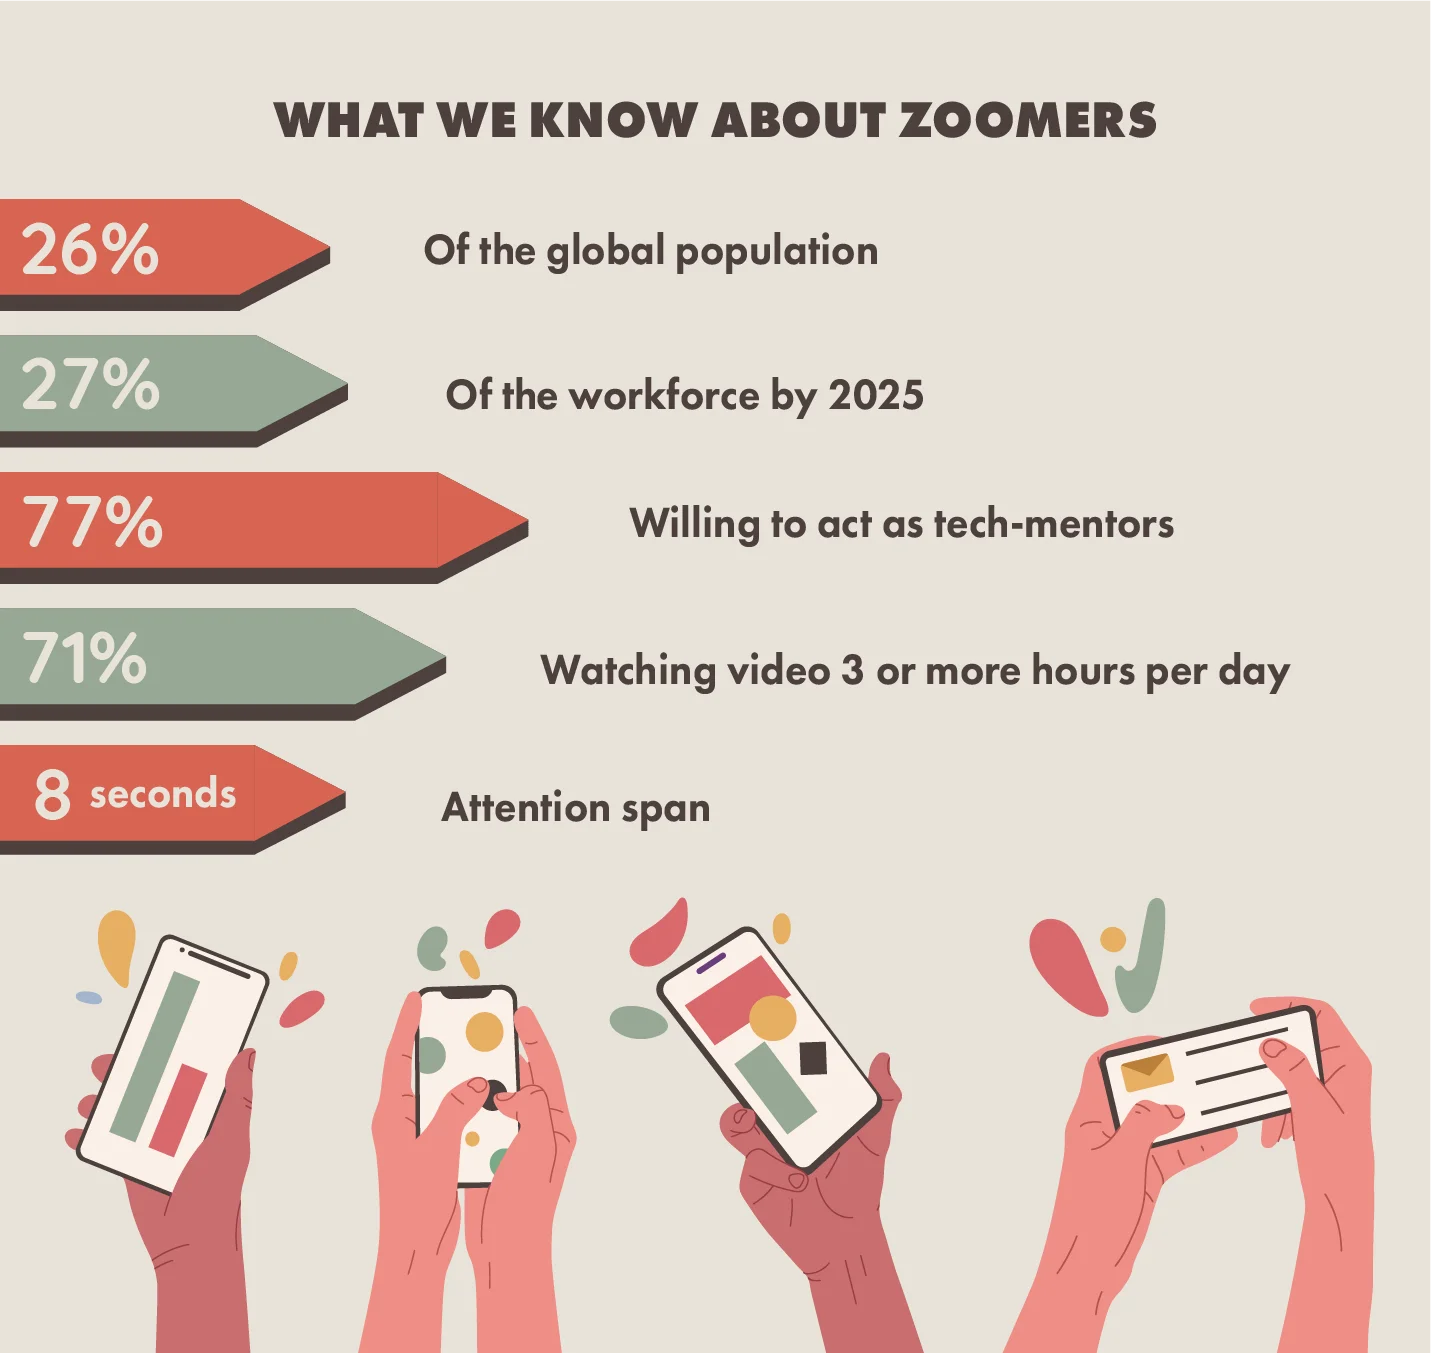 Statistics about Zoomers